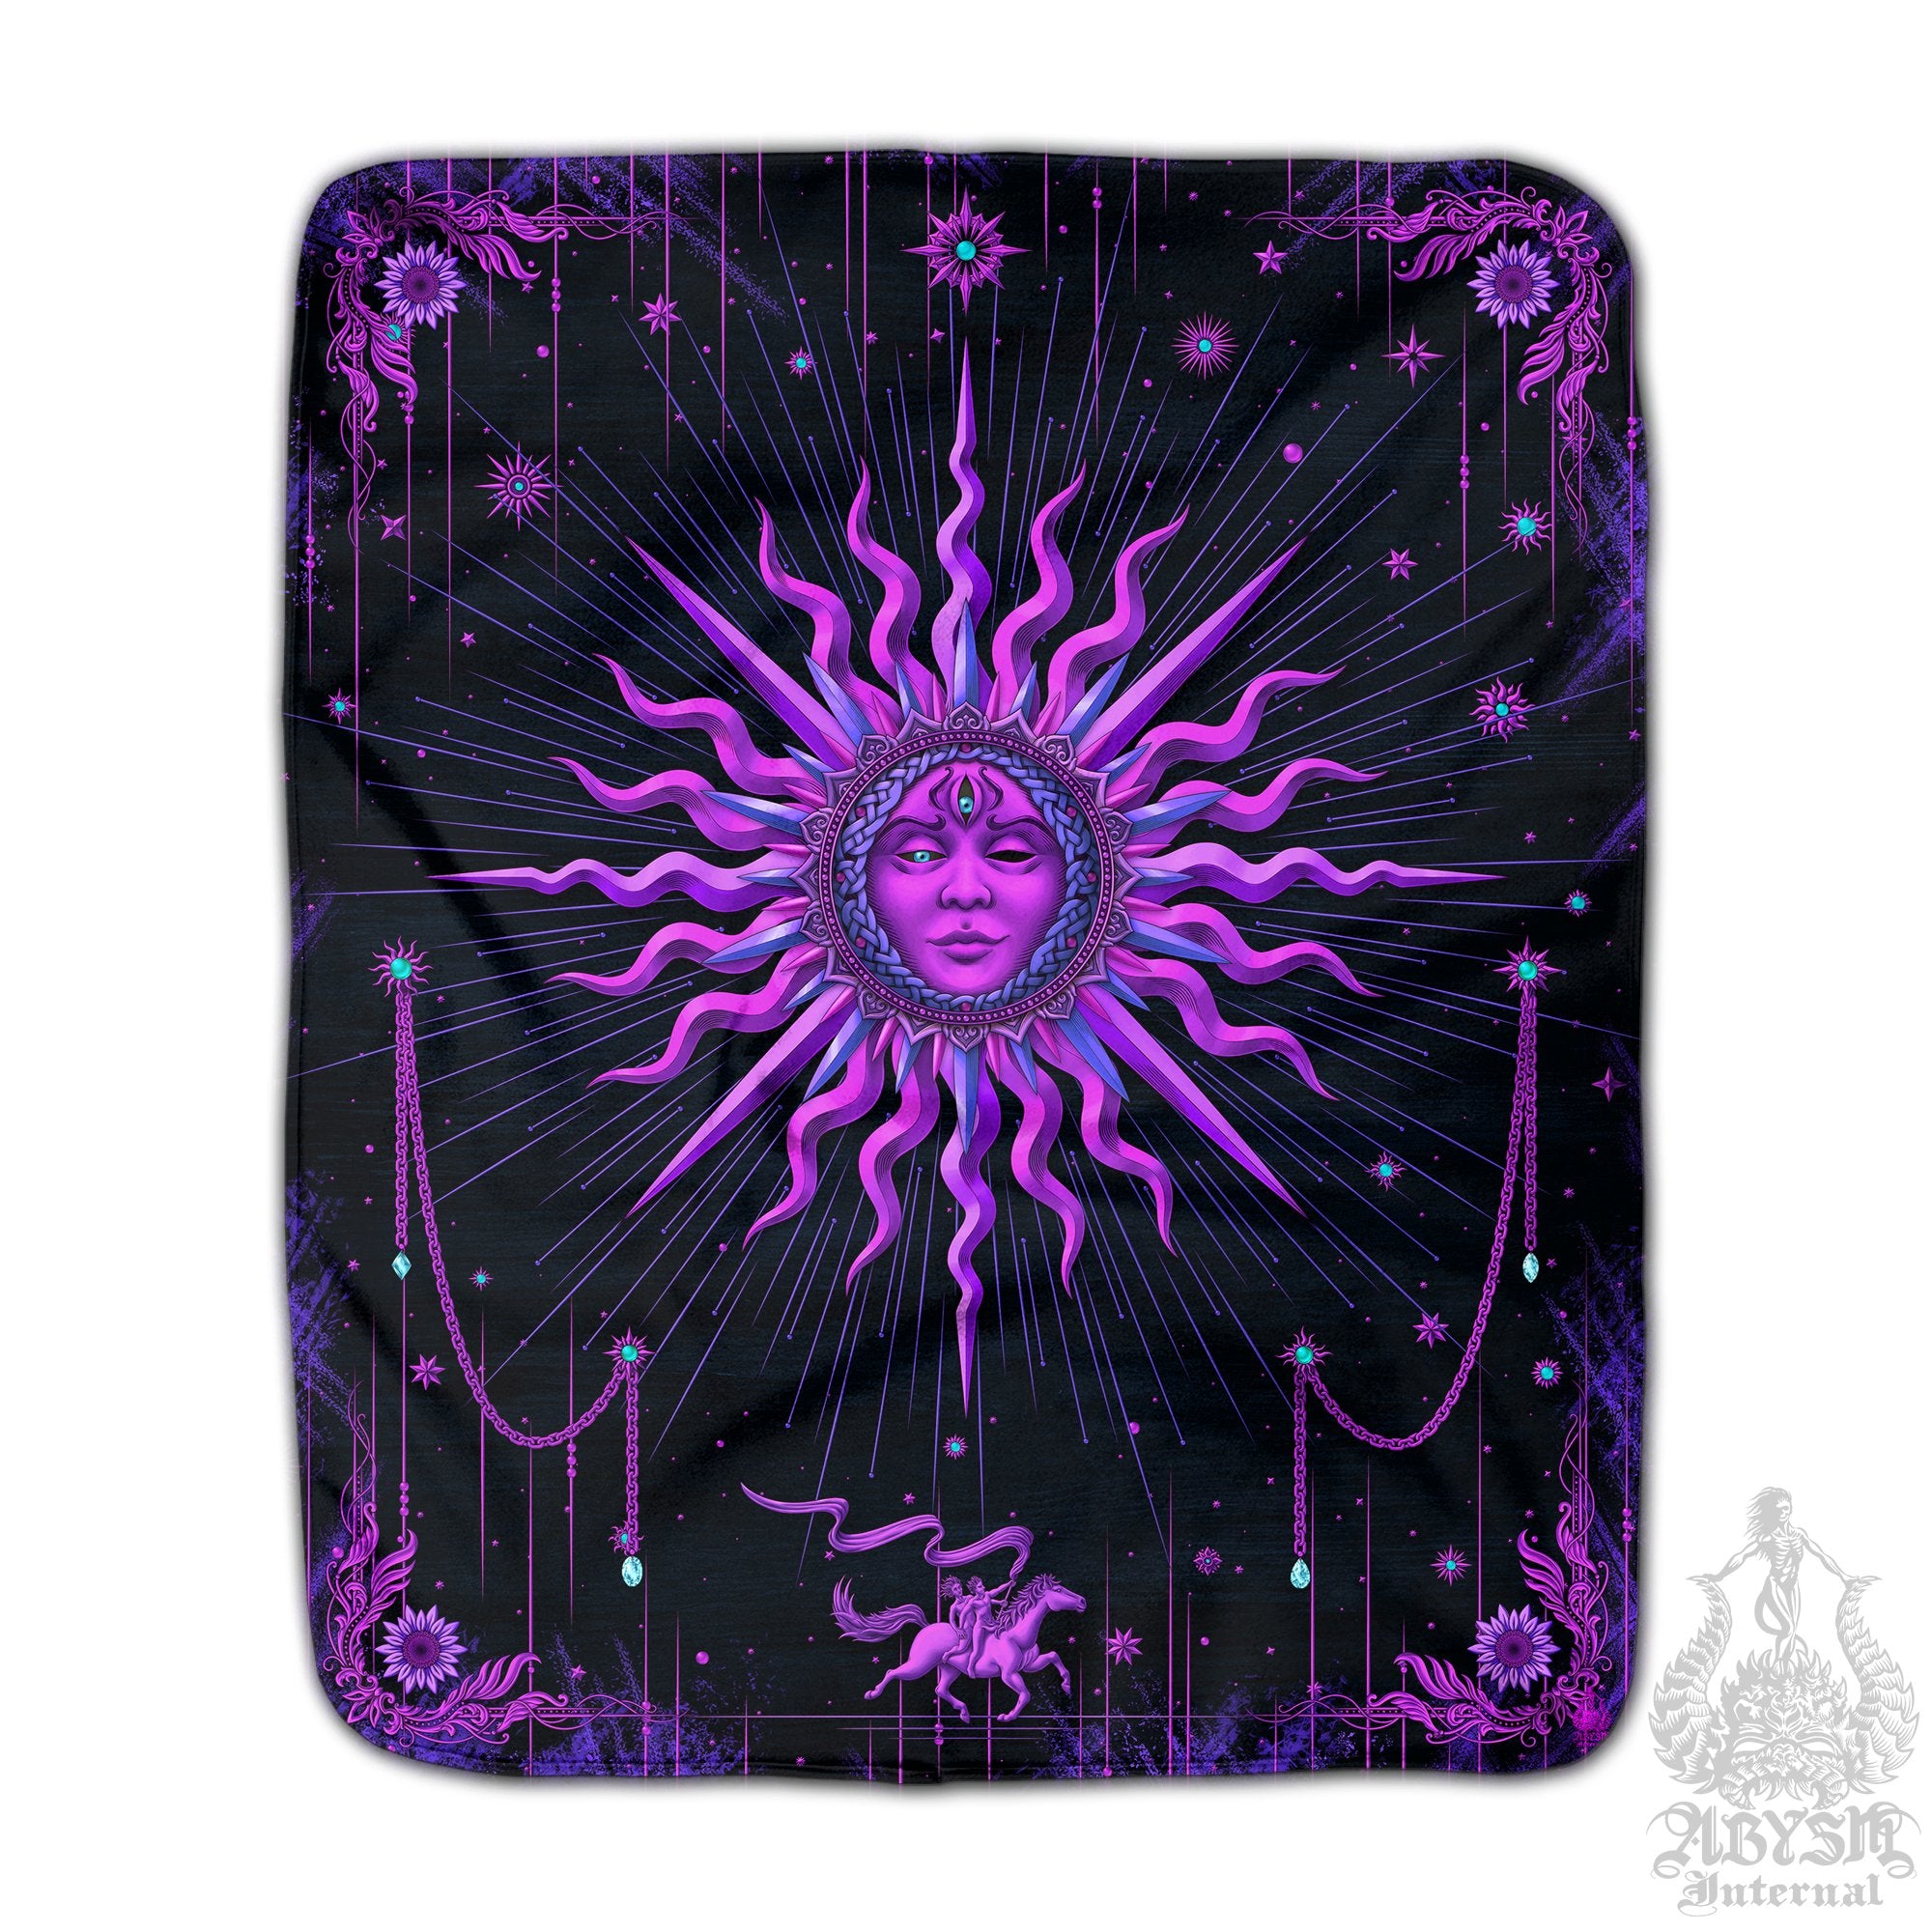 Whimsigoth Sun Sherpa Fleece Throw Blanket, Pastel Goth Tarot Arcana Art, Witchy Esoteric Room, Good Witch Home Decor, Fortune Gift - Purple Black - Abysm Internal